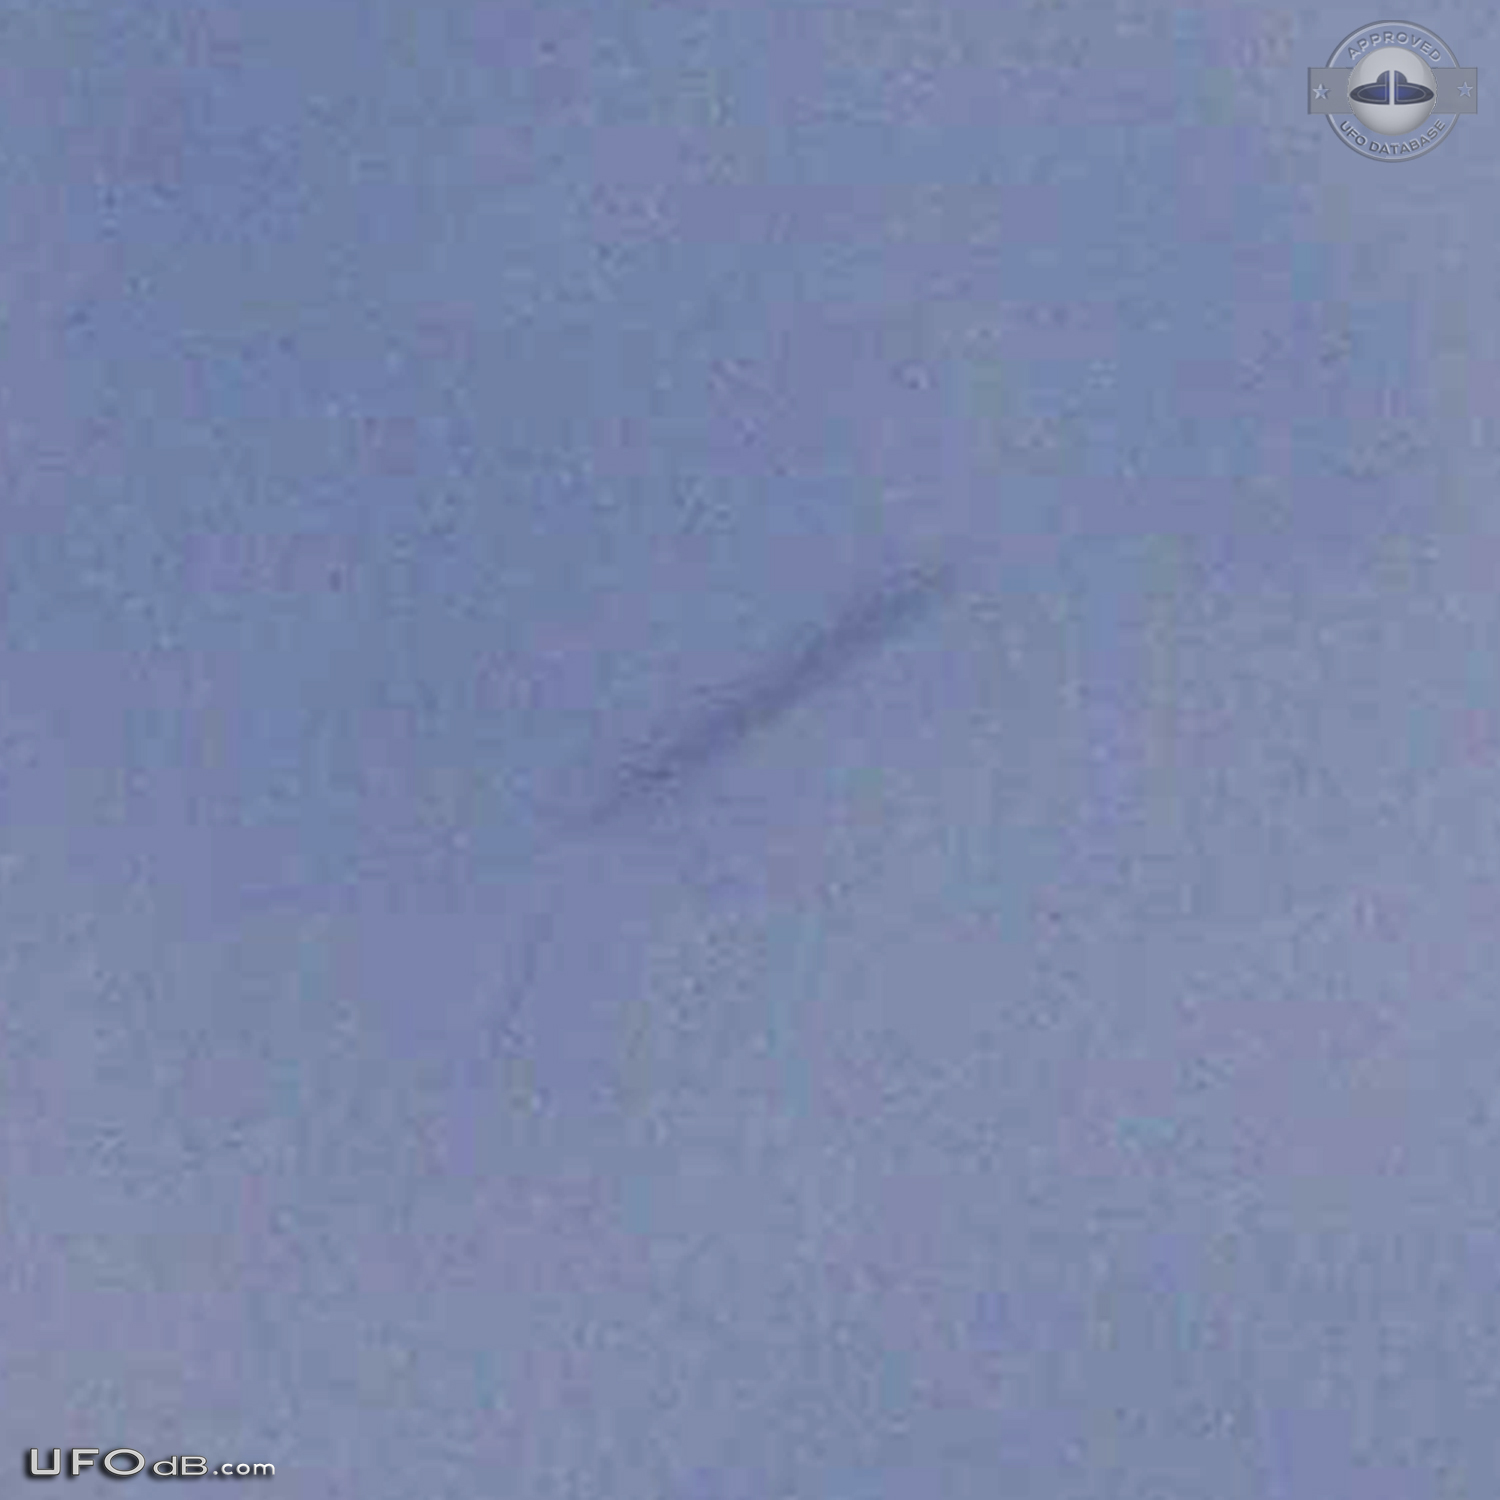 Many UFO sightings in Lebanon vilage got citizens to open their minds  UFO Picture #438-5